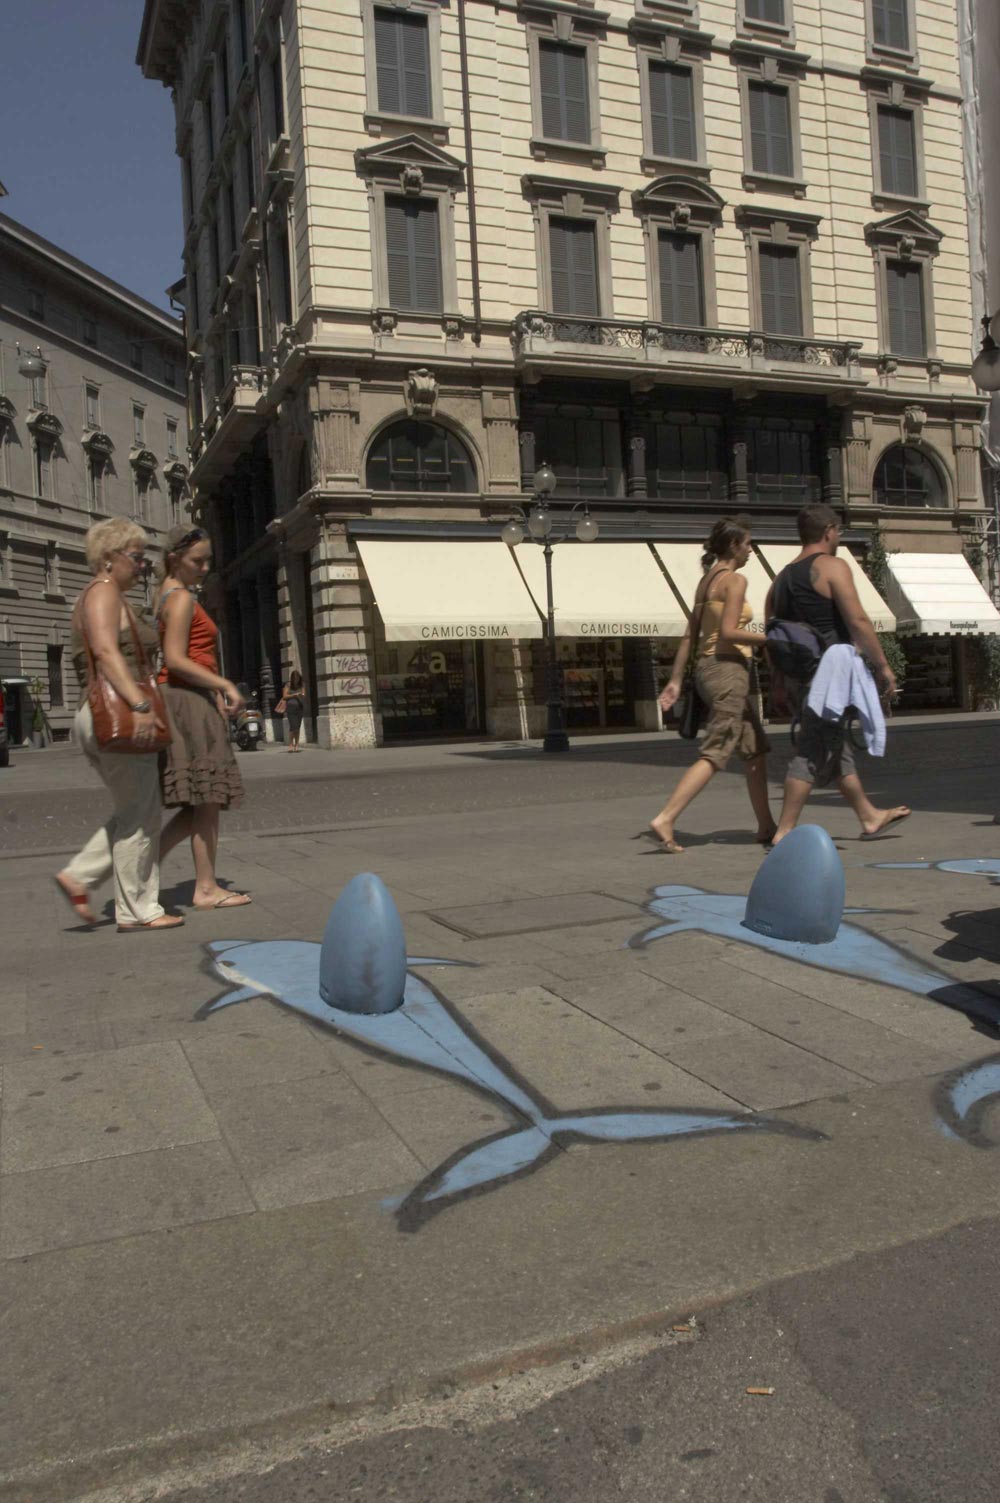 Dolphins painted on street furniture